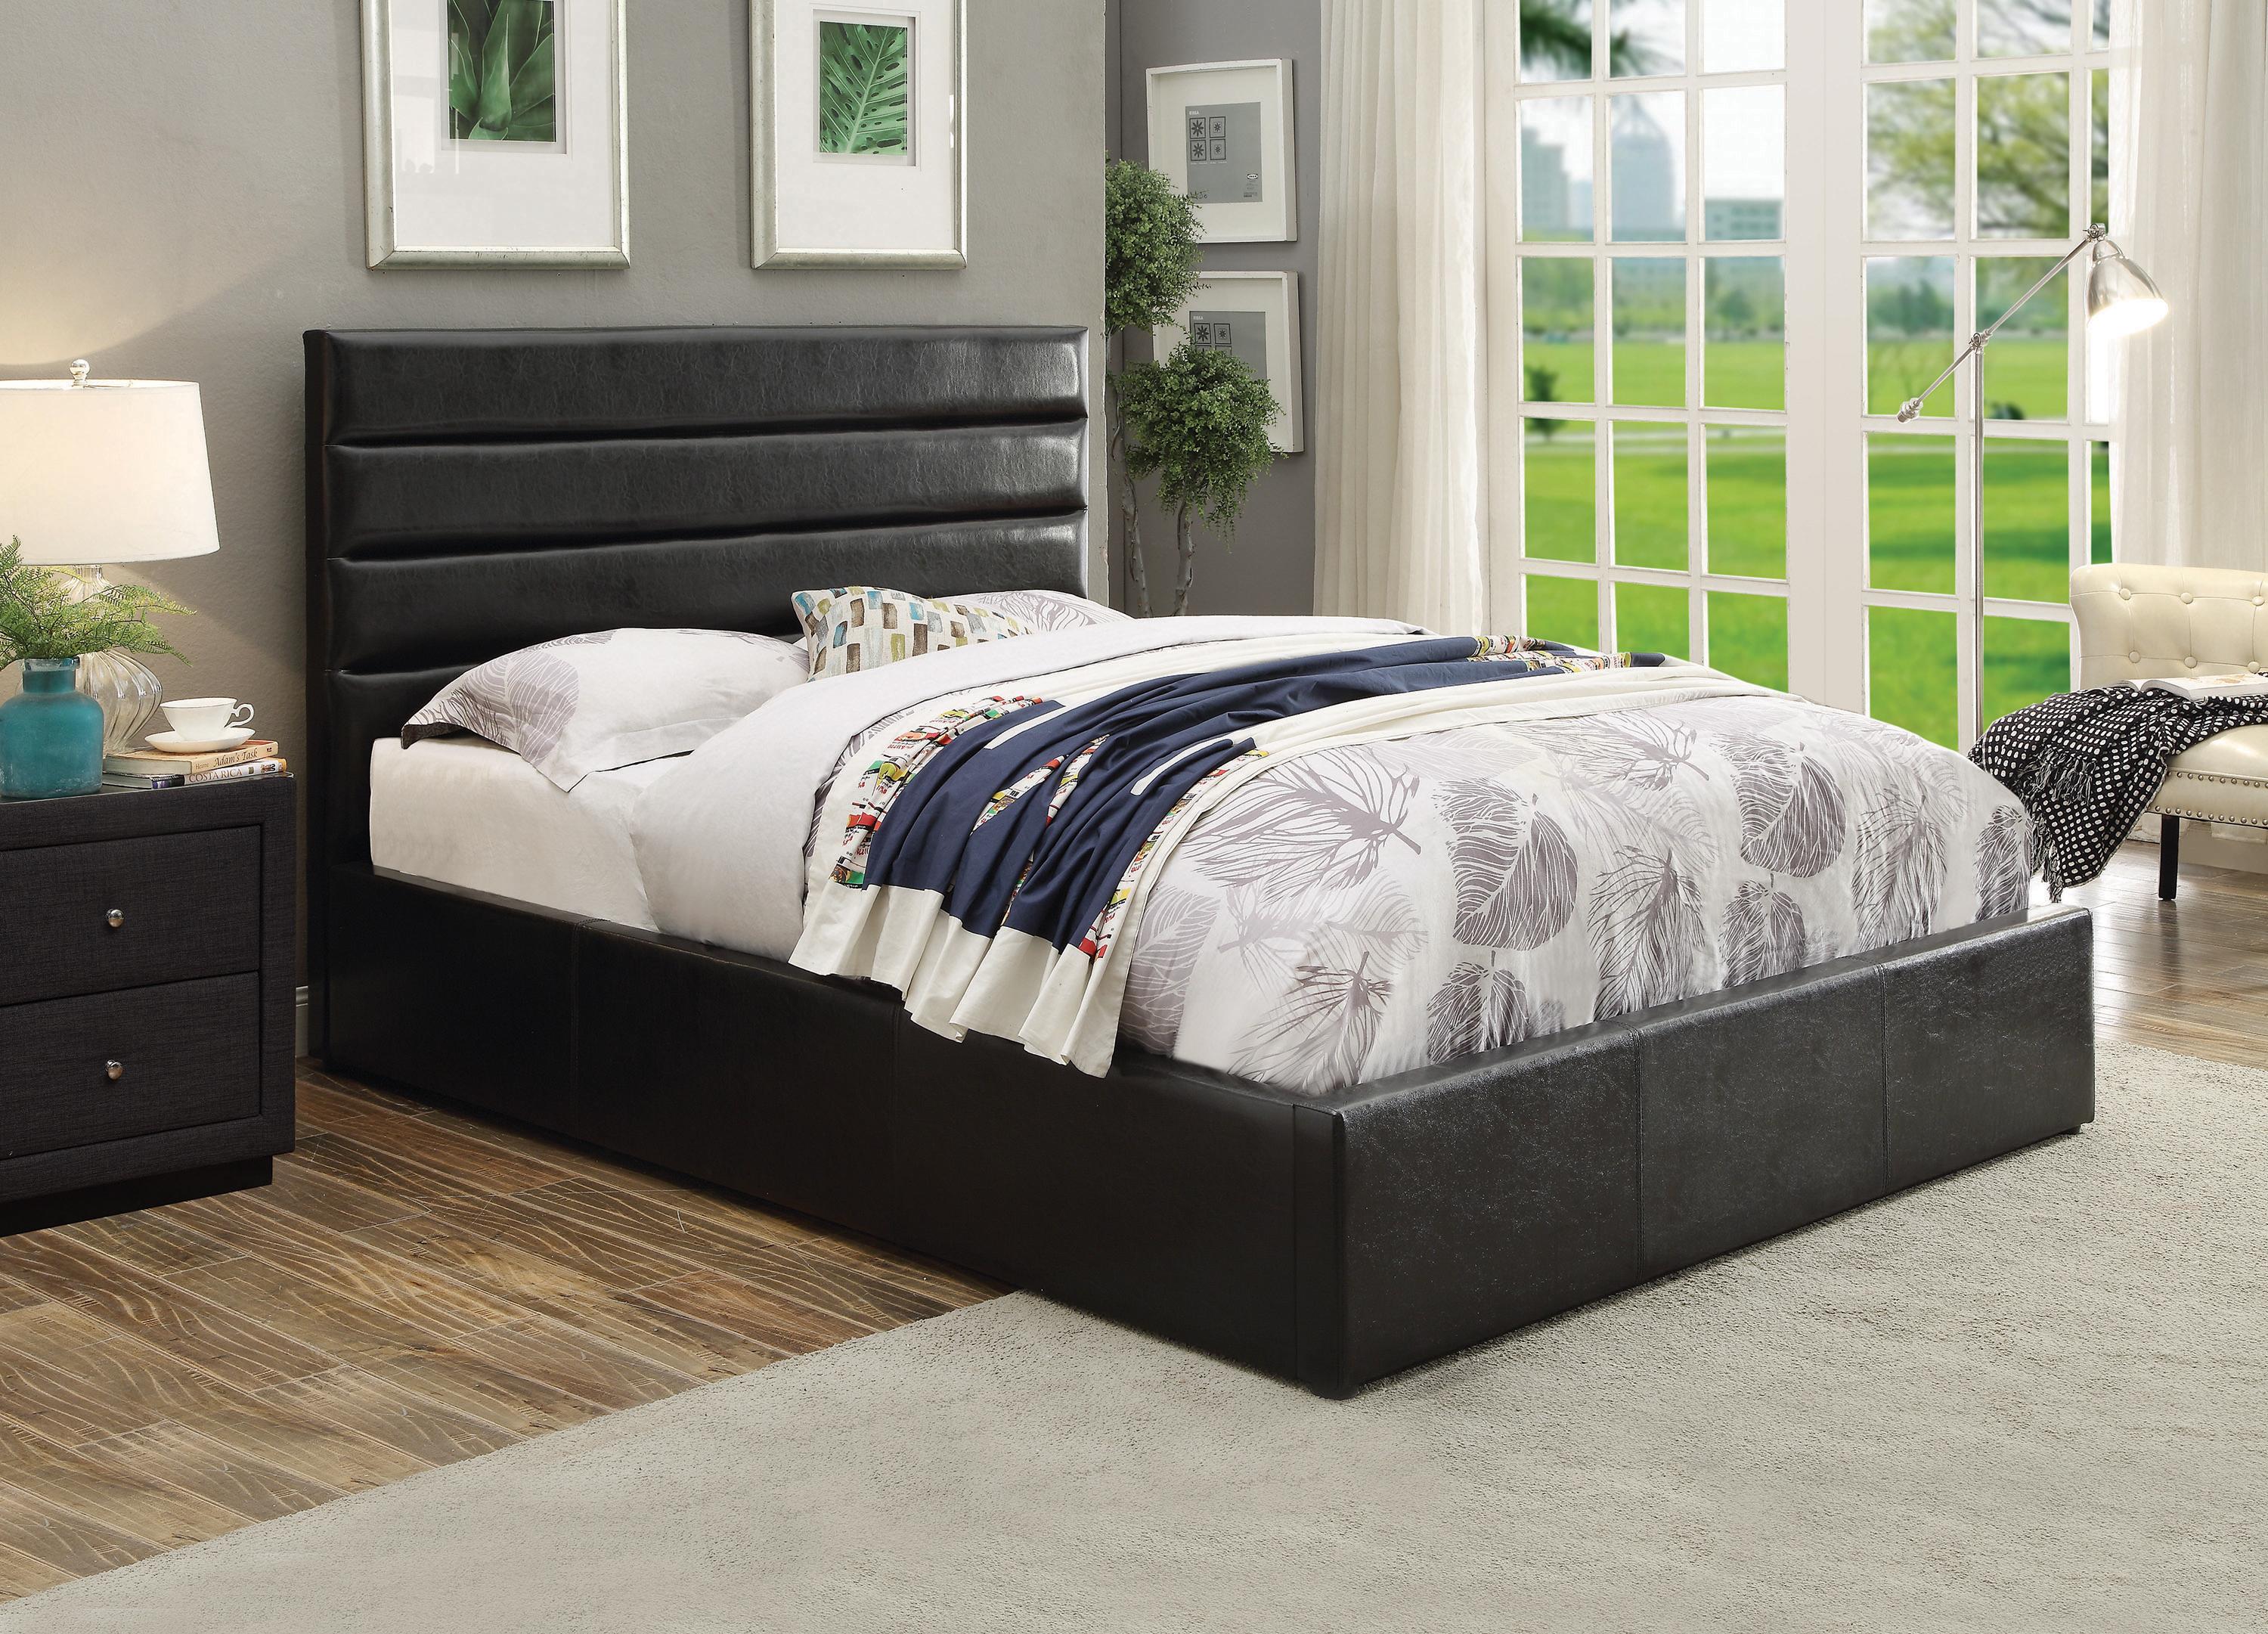 

    
Contemporary Black Leatherette Full Bed Coaster 300469F Riverbend
